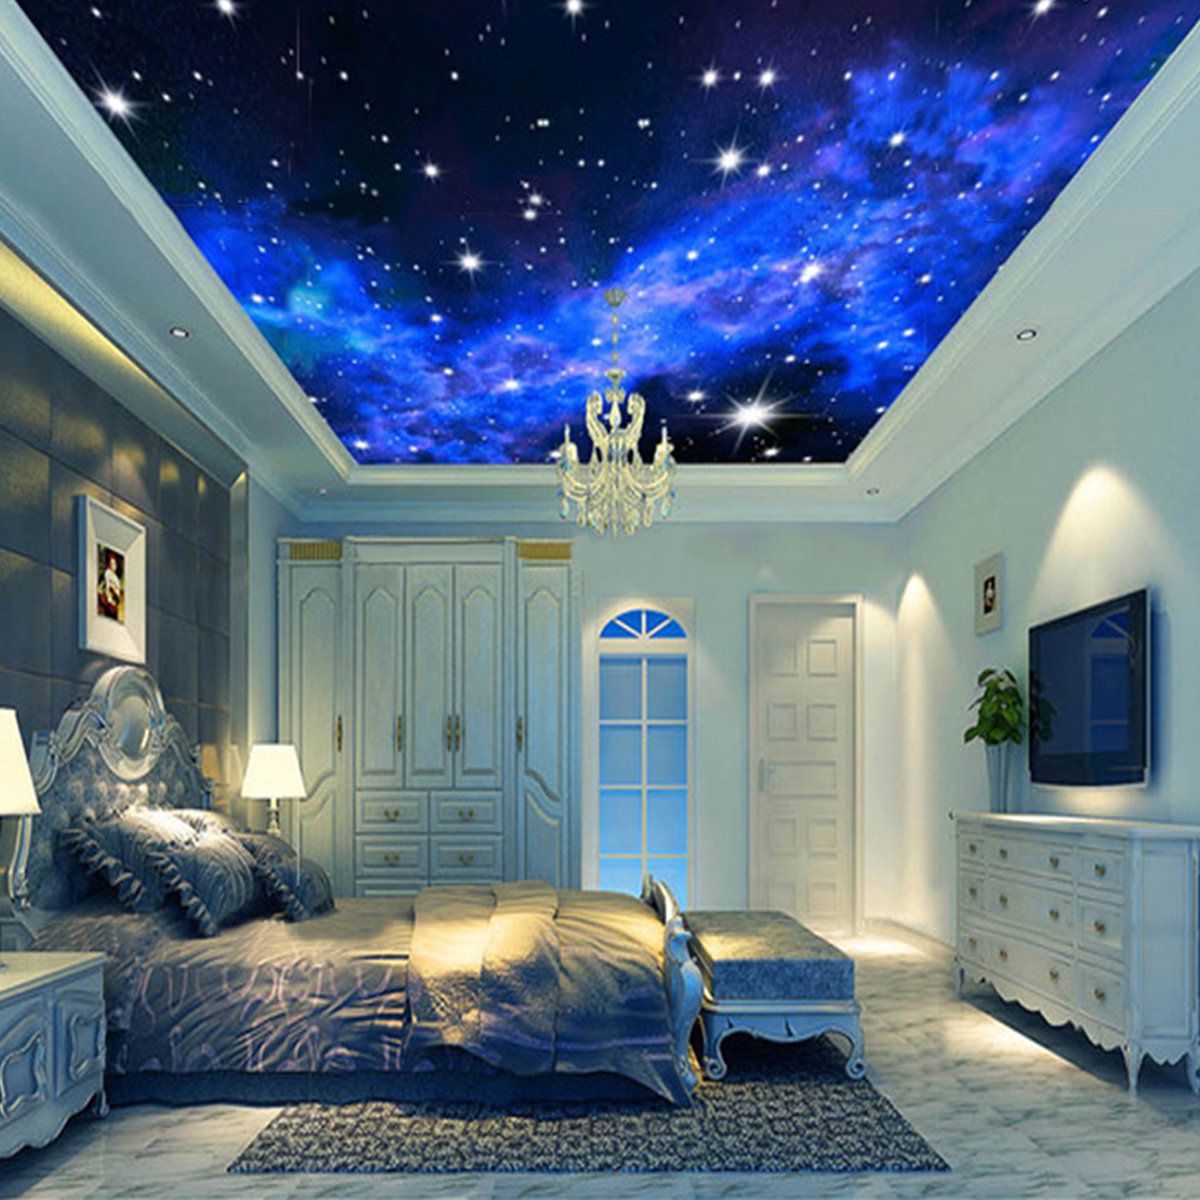 3d wallpaper for wall,ceiling,room,blue,property,interior design